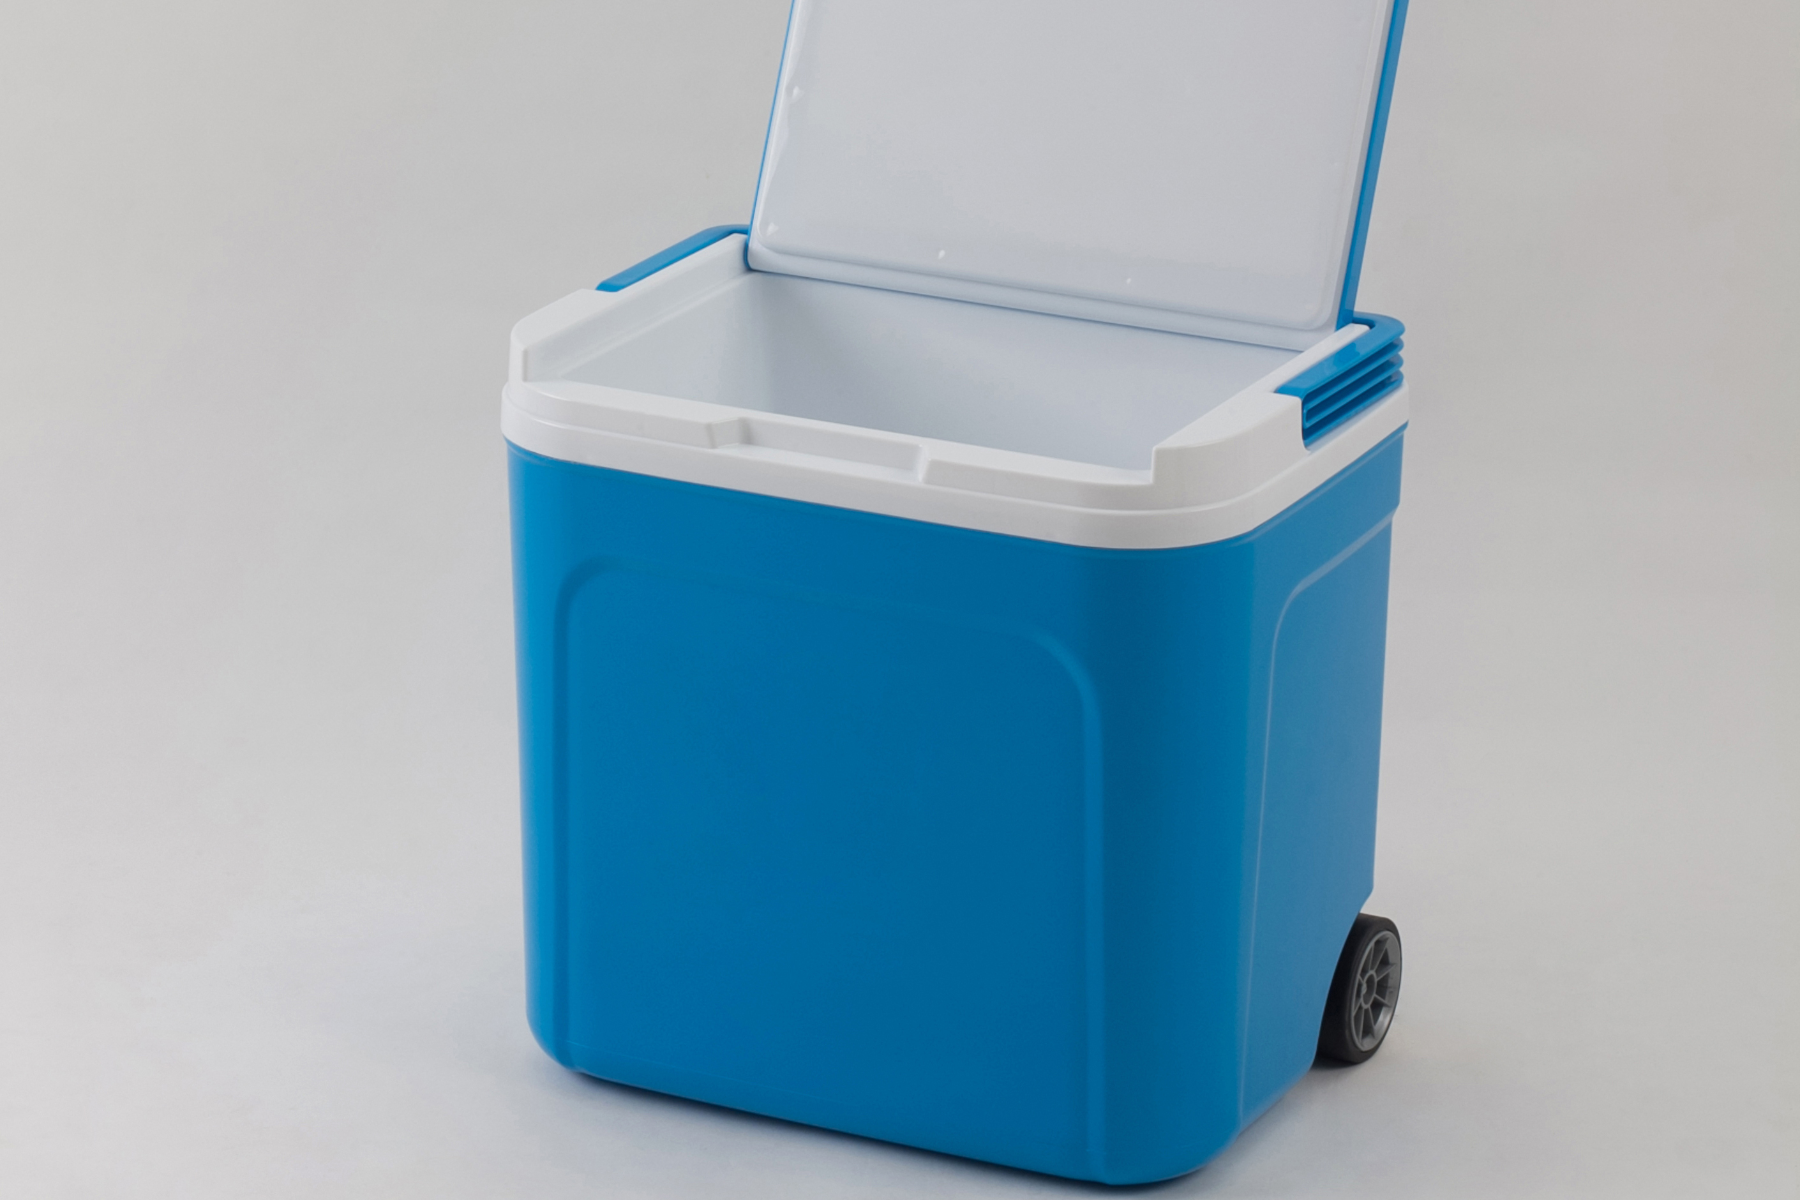 A blue icebox with black wheels and a handle